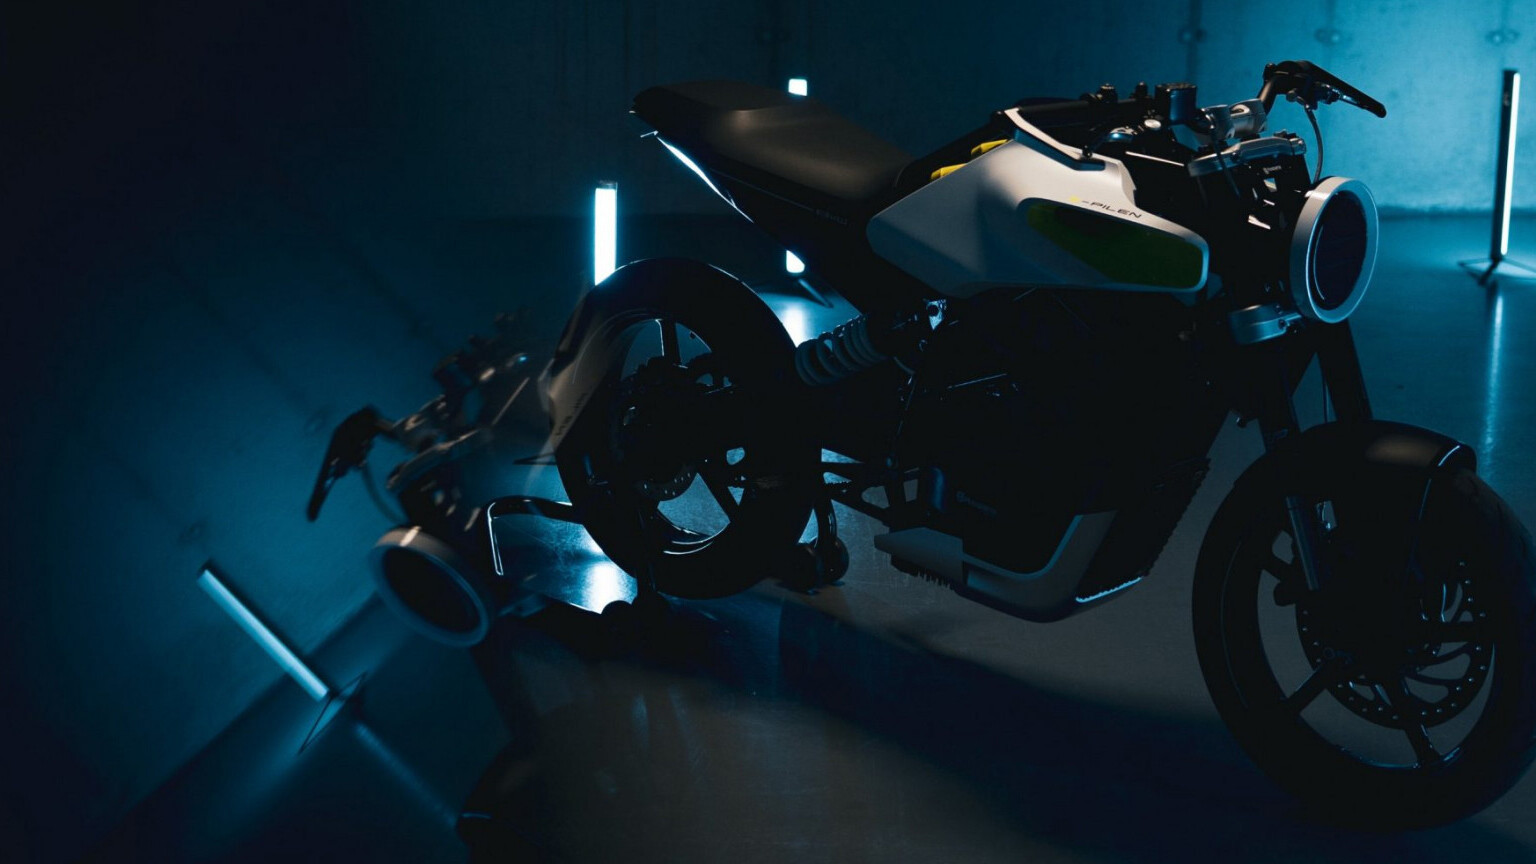 Feast your eyes on Husqvarna’s stunning electric motorcycle concept